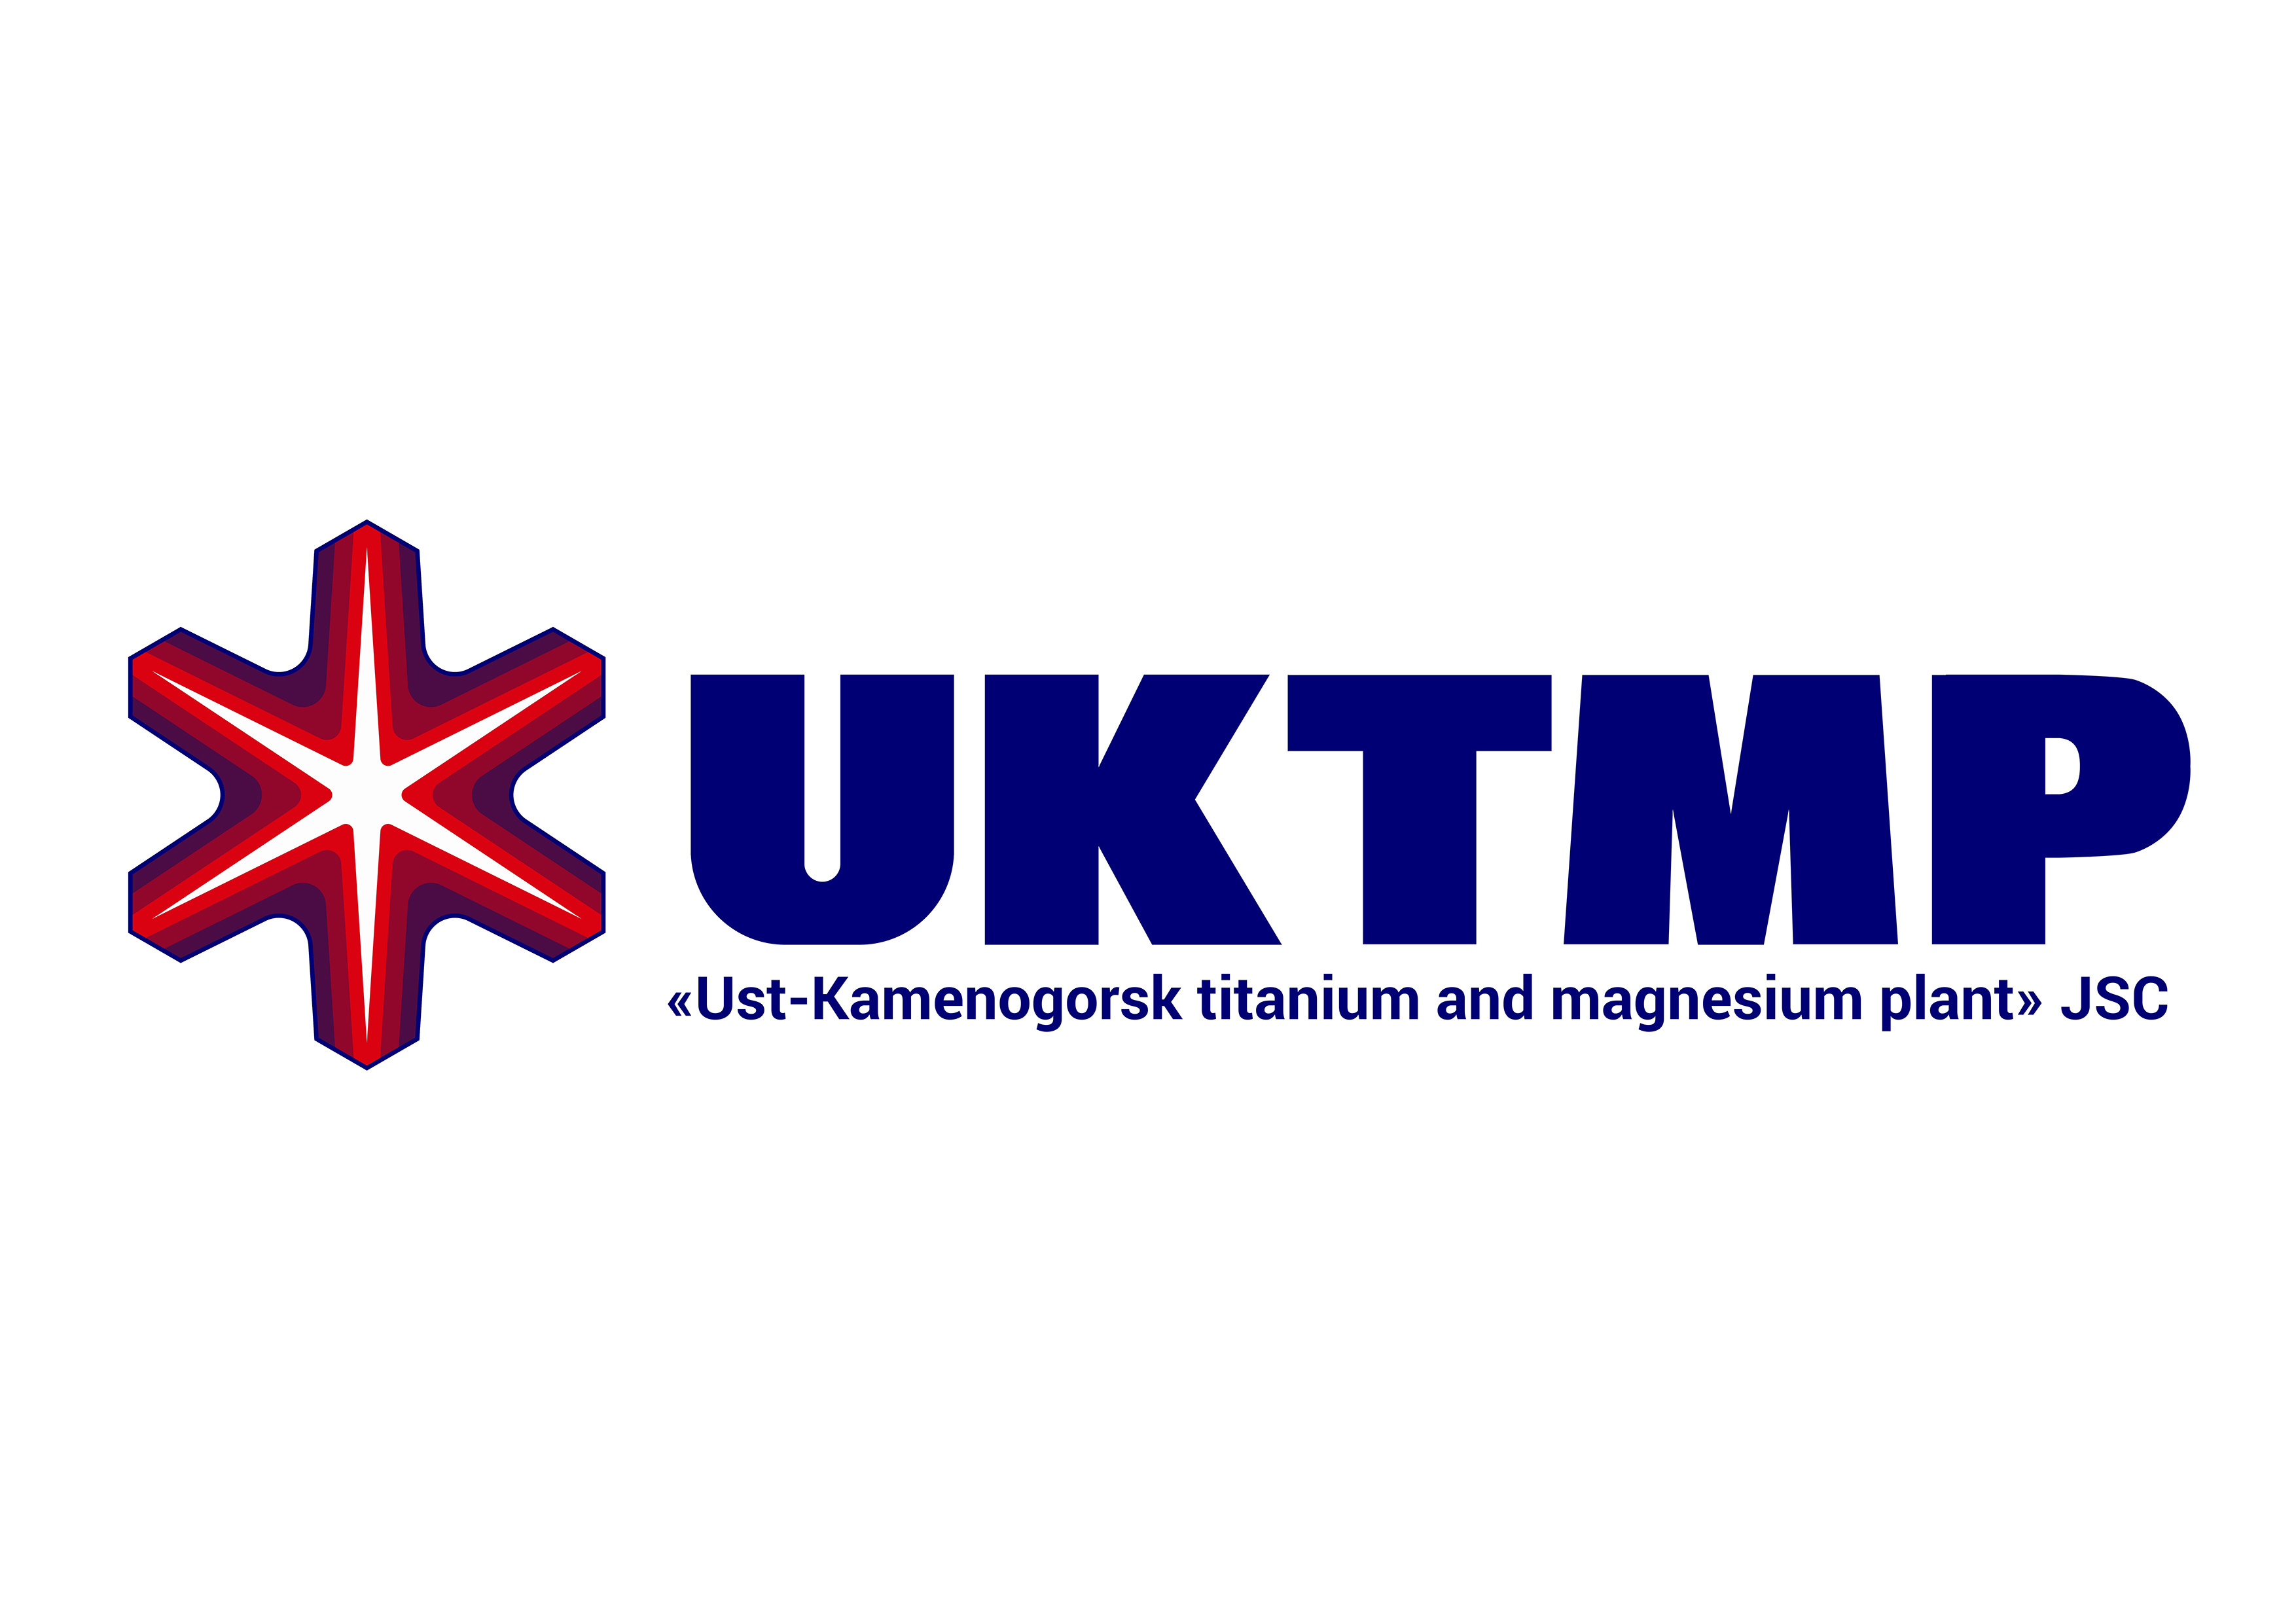 Notification about holding Annual General Meeting of shareholders of Ust-Kamenogorsk Titanium and Magnesium Plant JSC